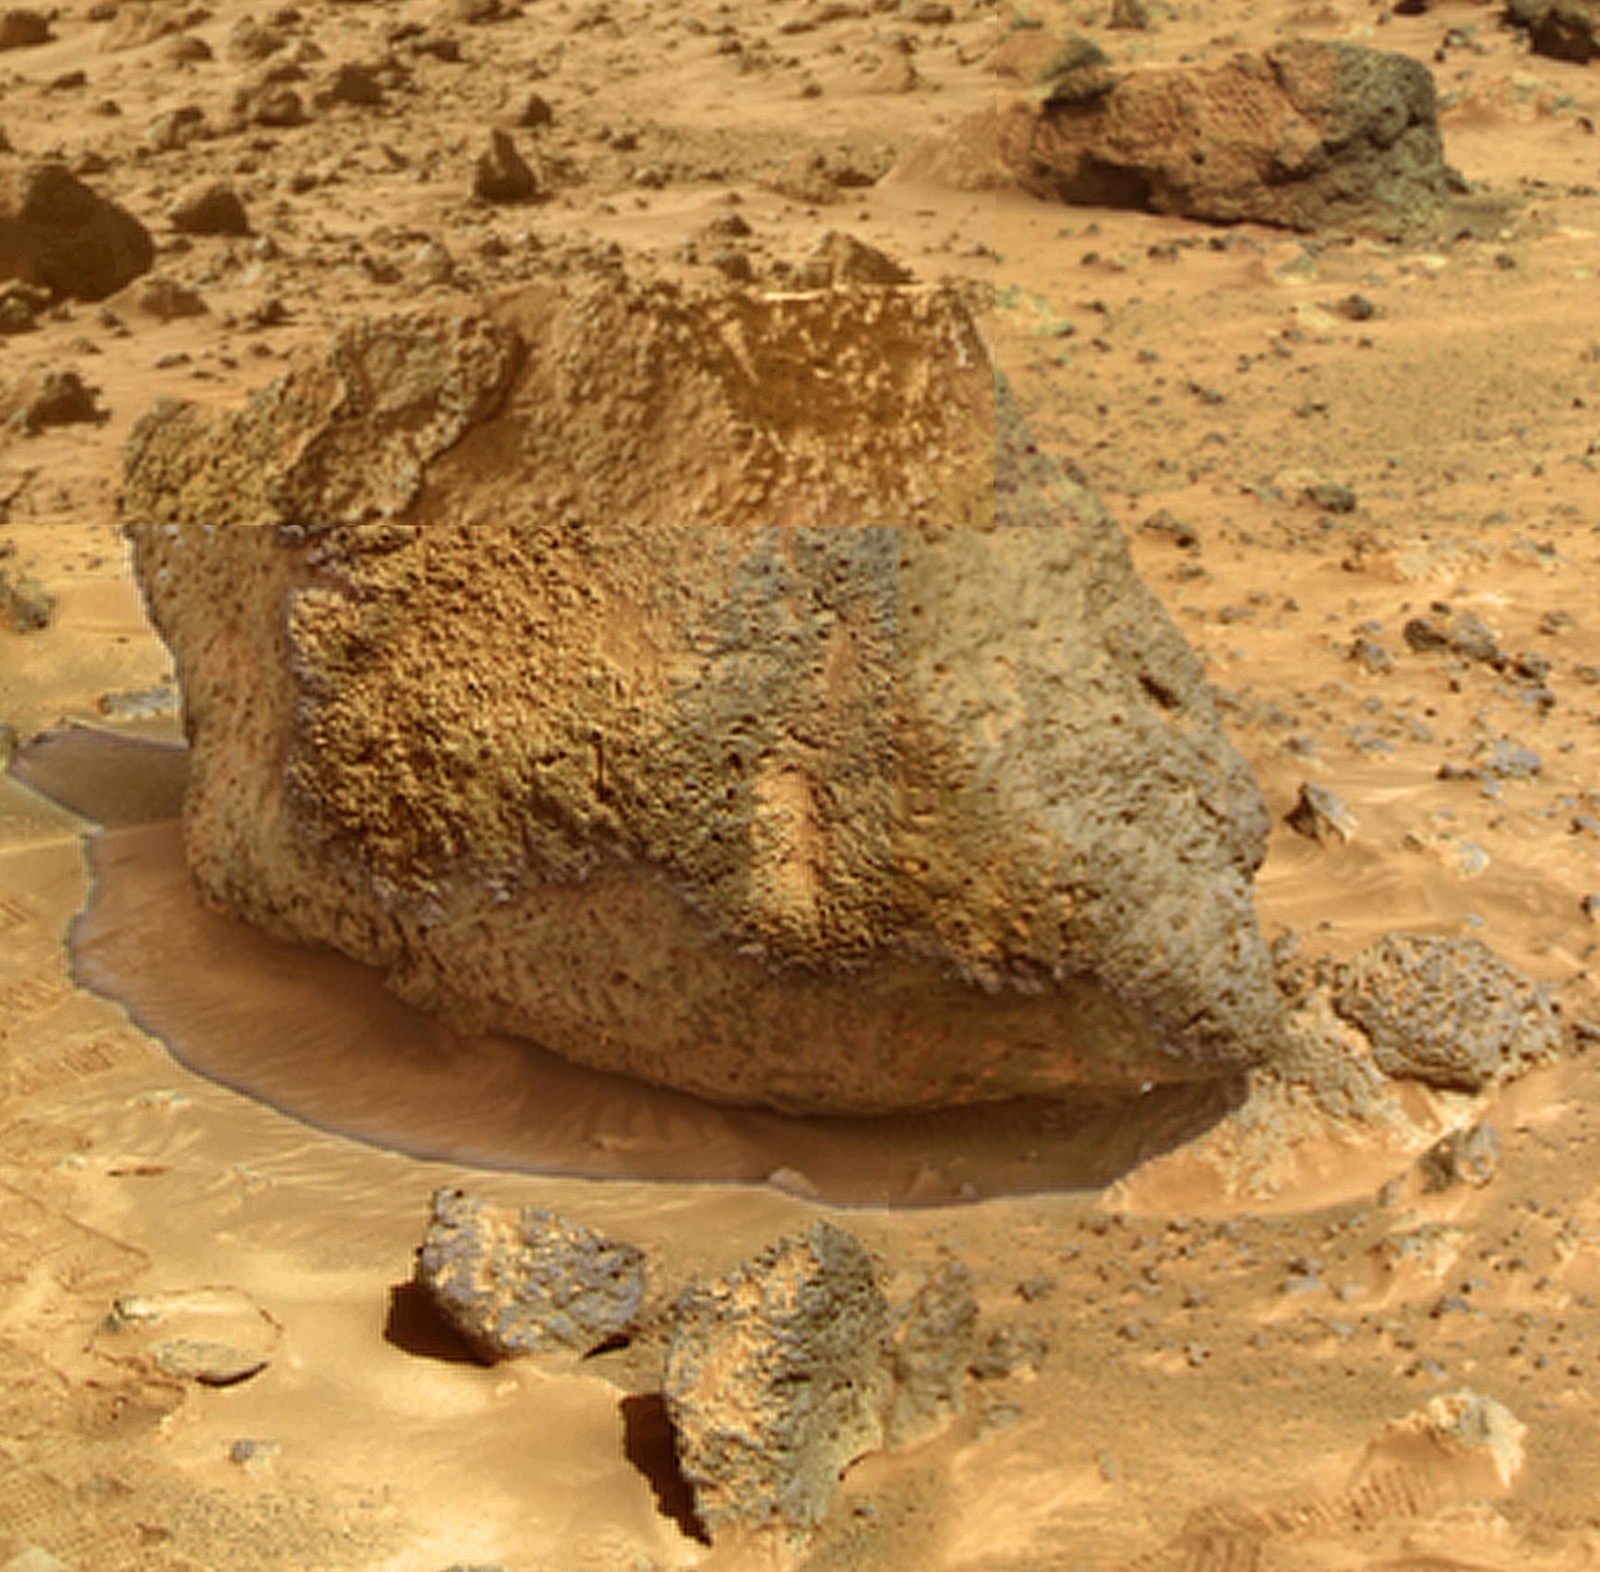 Yogi' is a meter-size rock about 5 meters northwest of NASA's Mars Pathfinder lander and was the second rock visited by the Sojourner Rover's alpha proton X-ray spectrometer (APXS) instrument. Sol 1 began on July 4, 1997.